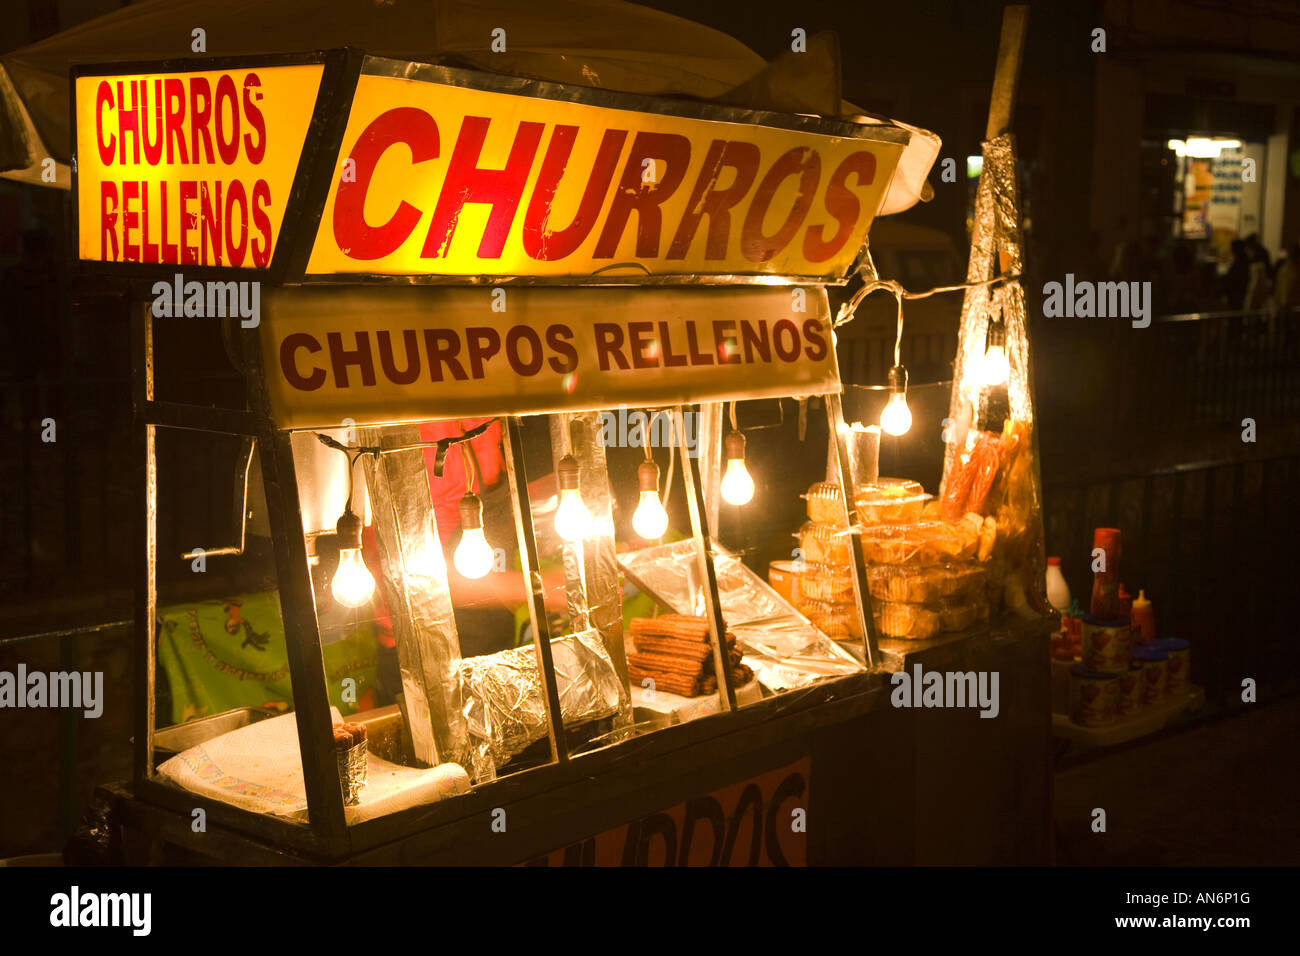 MEXICO Guanajuato Street vendor selling churros rellenos at night light bulbs at food booth Stock Photo